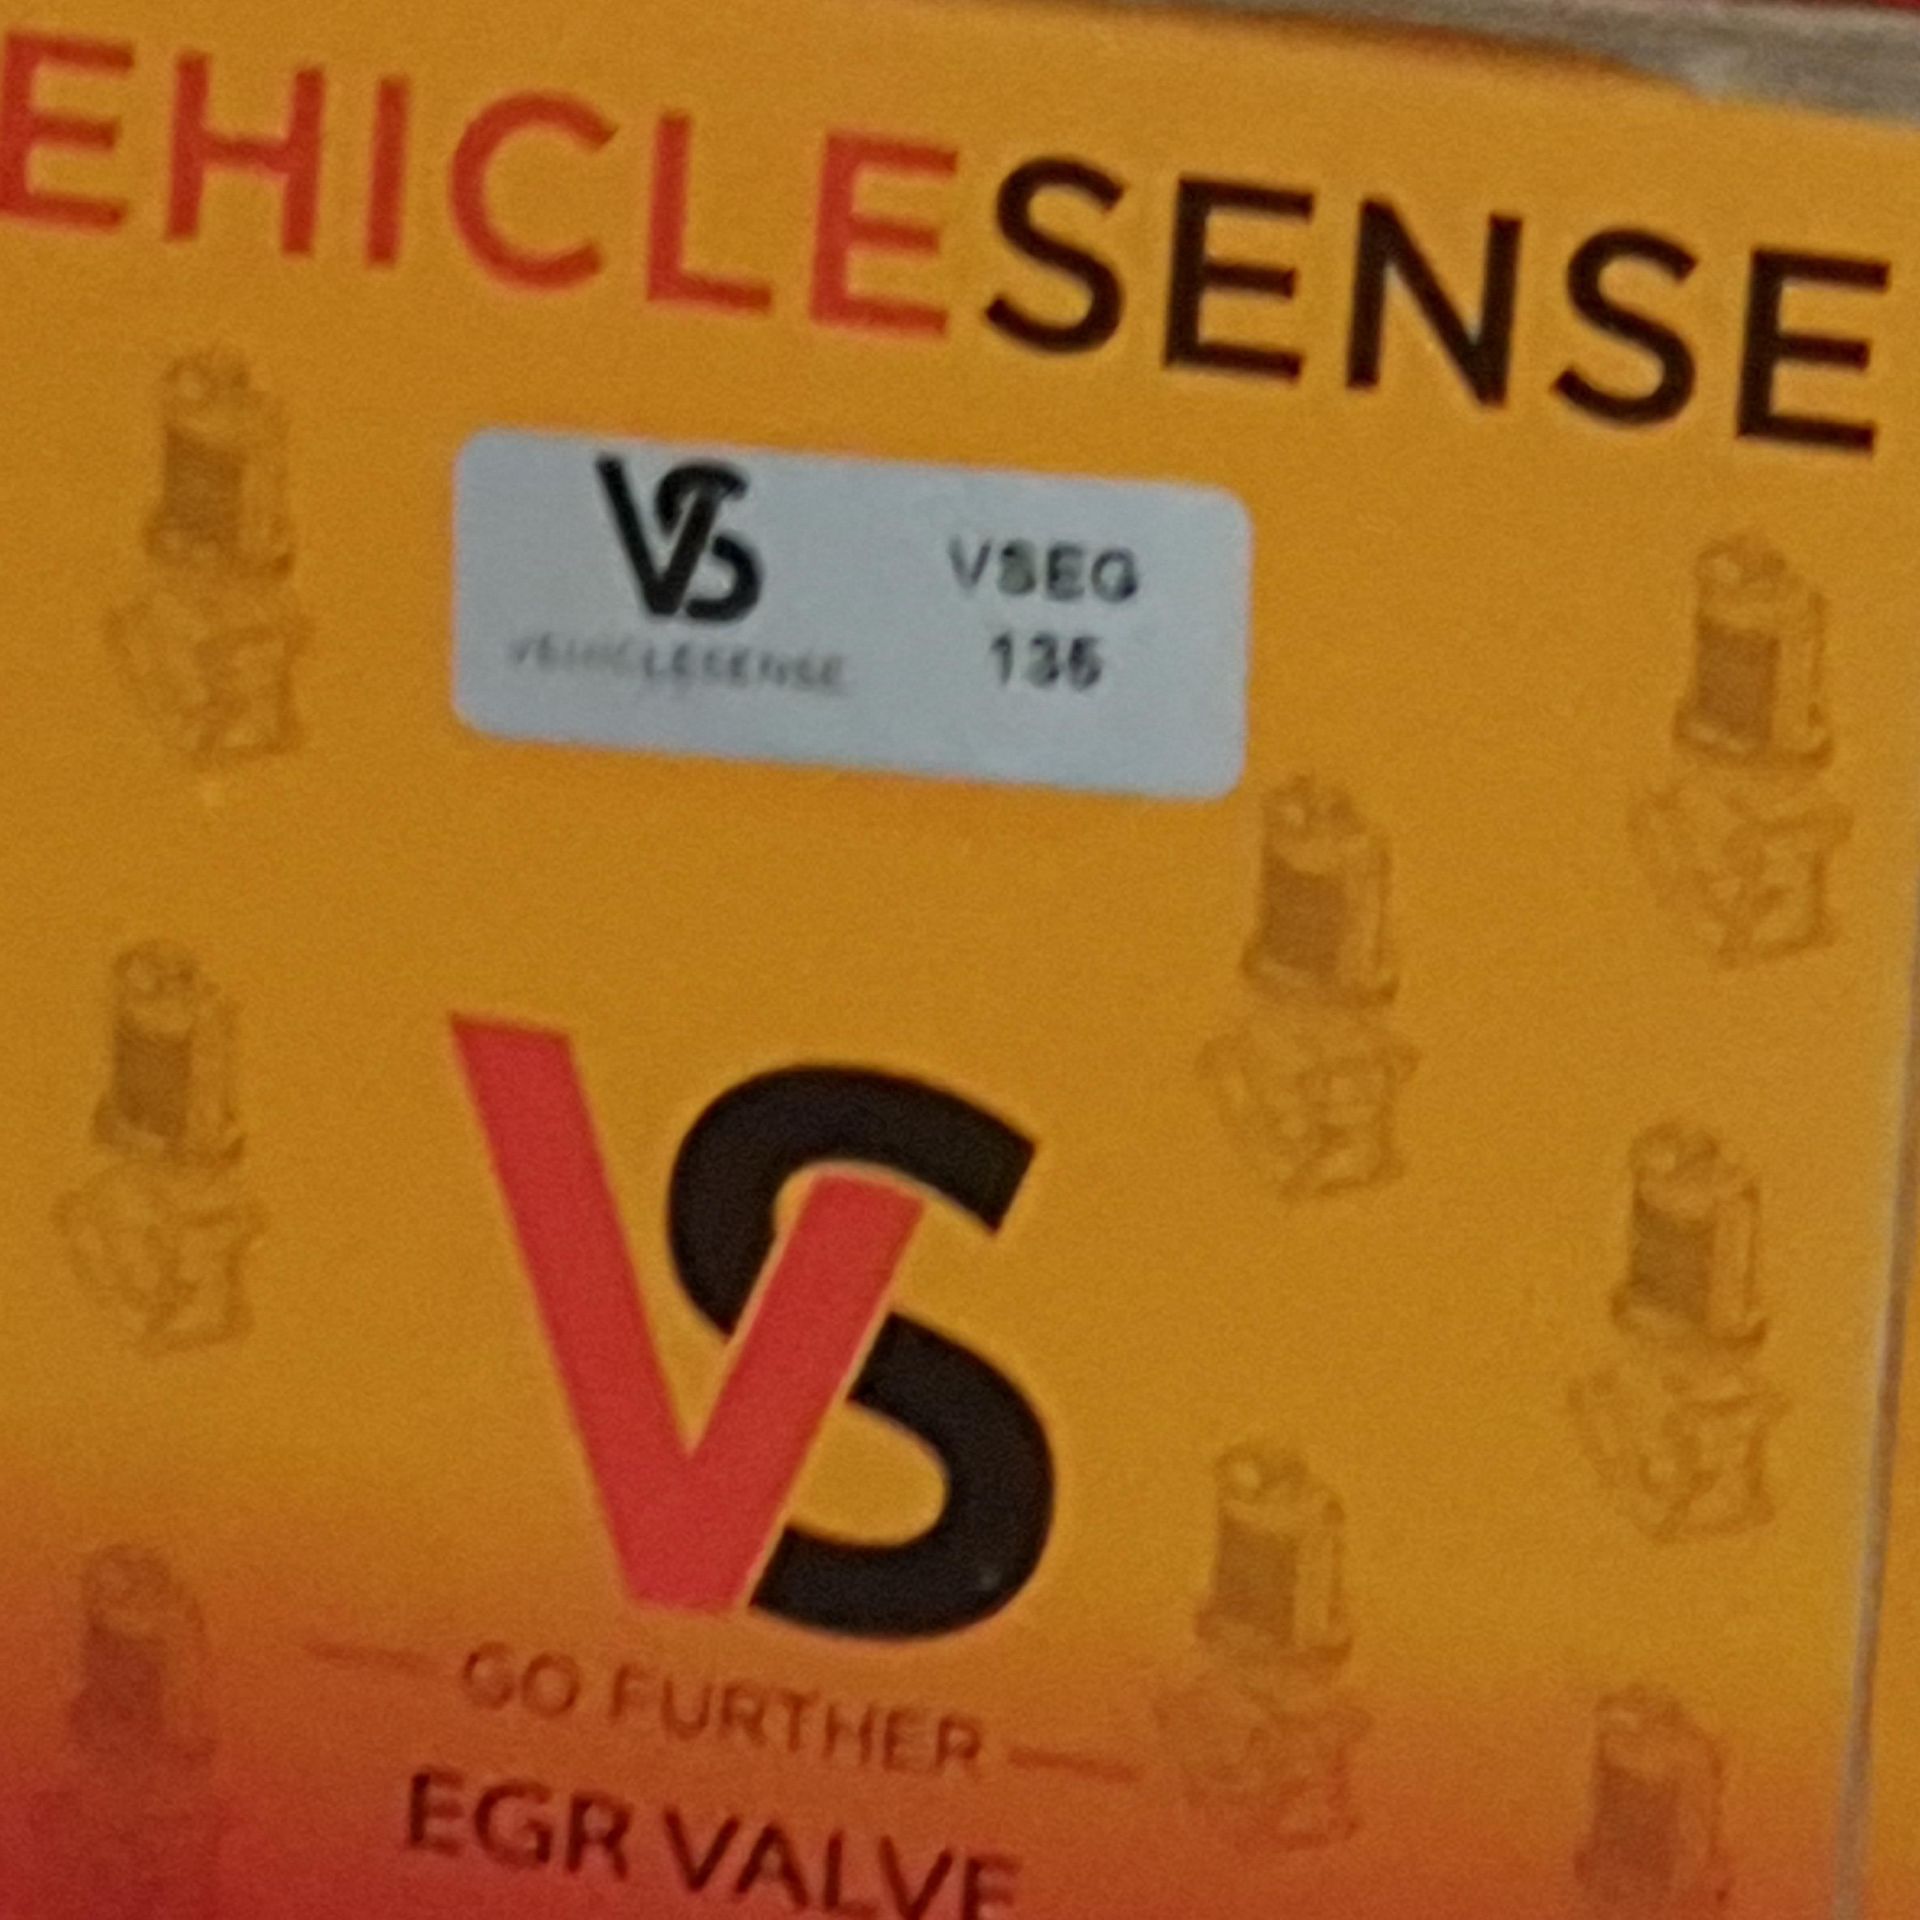 Approx. 45 Vehicle Sense EGR Valves, as set out on - Image 4 of 4